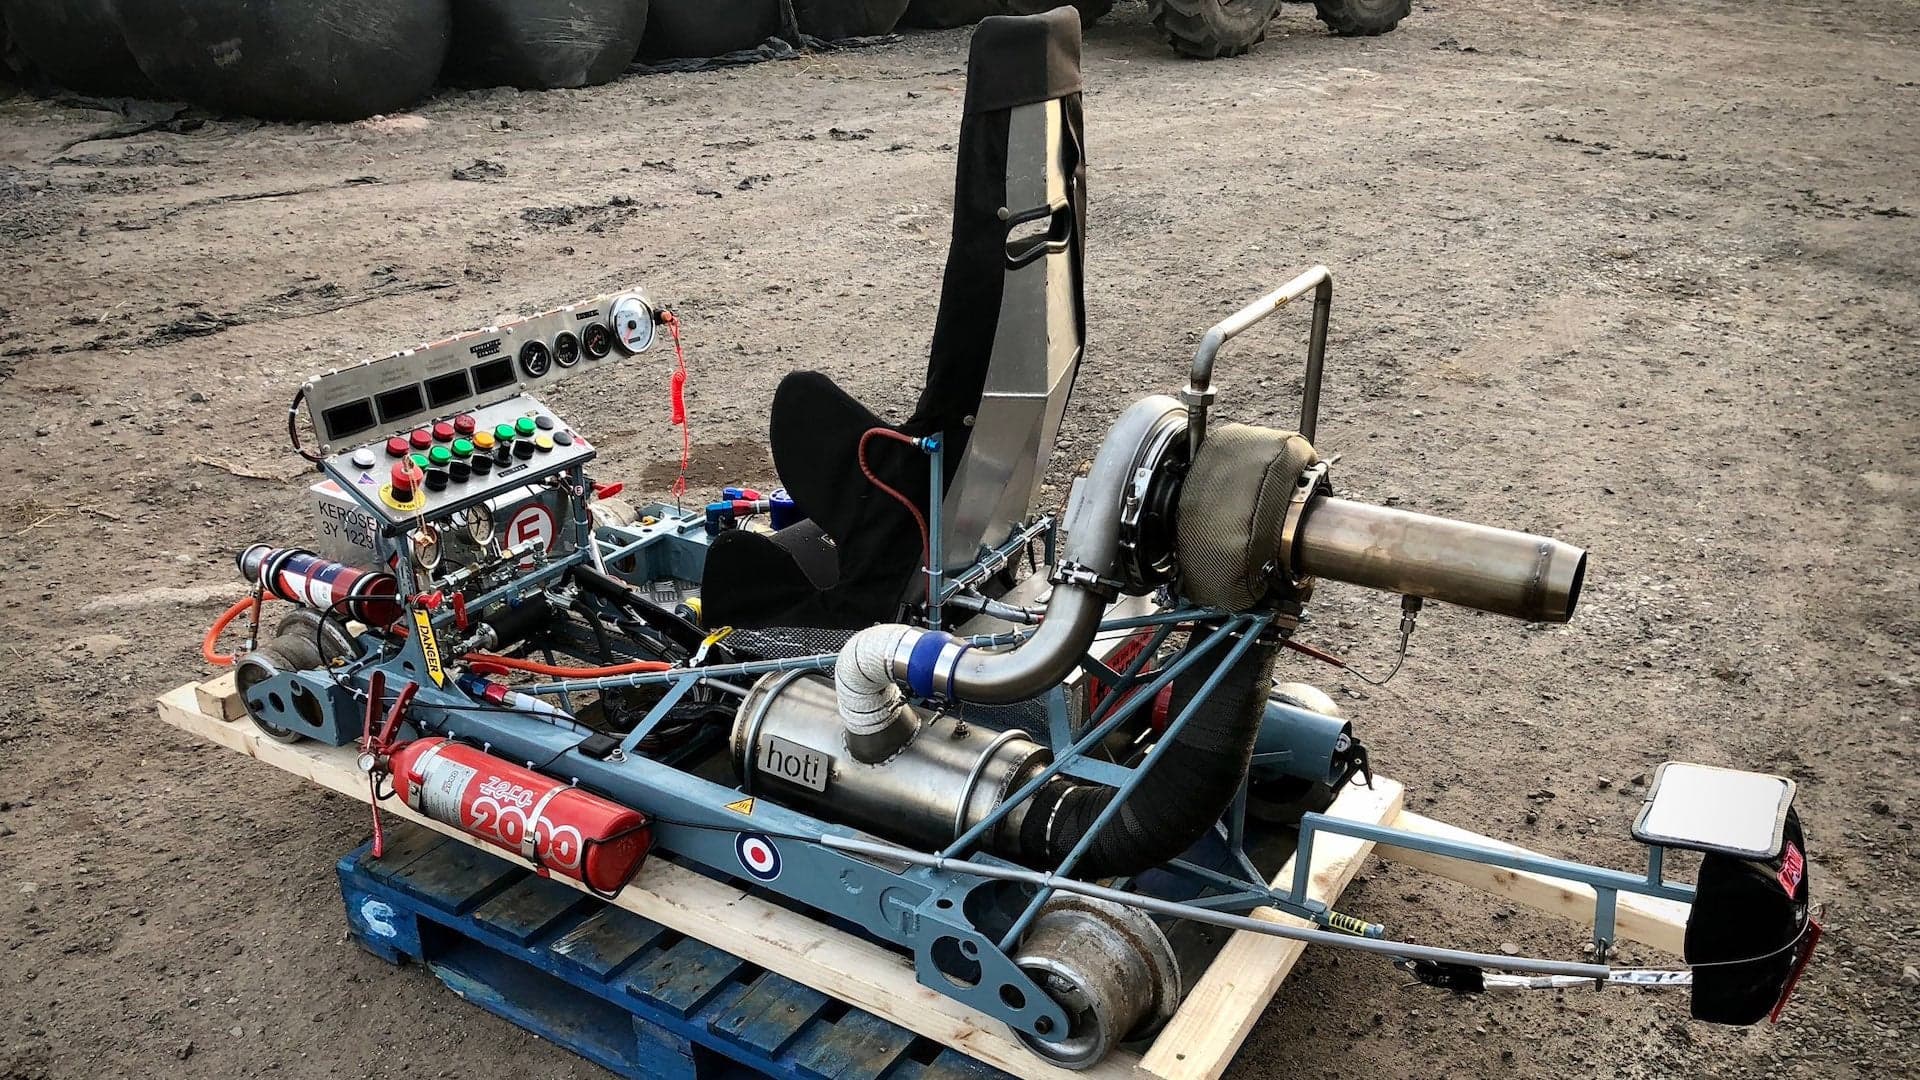 This Jet-Engined Mini Rail Kart Belongs on a Roller Coaster Right Now